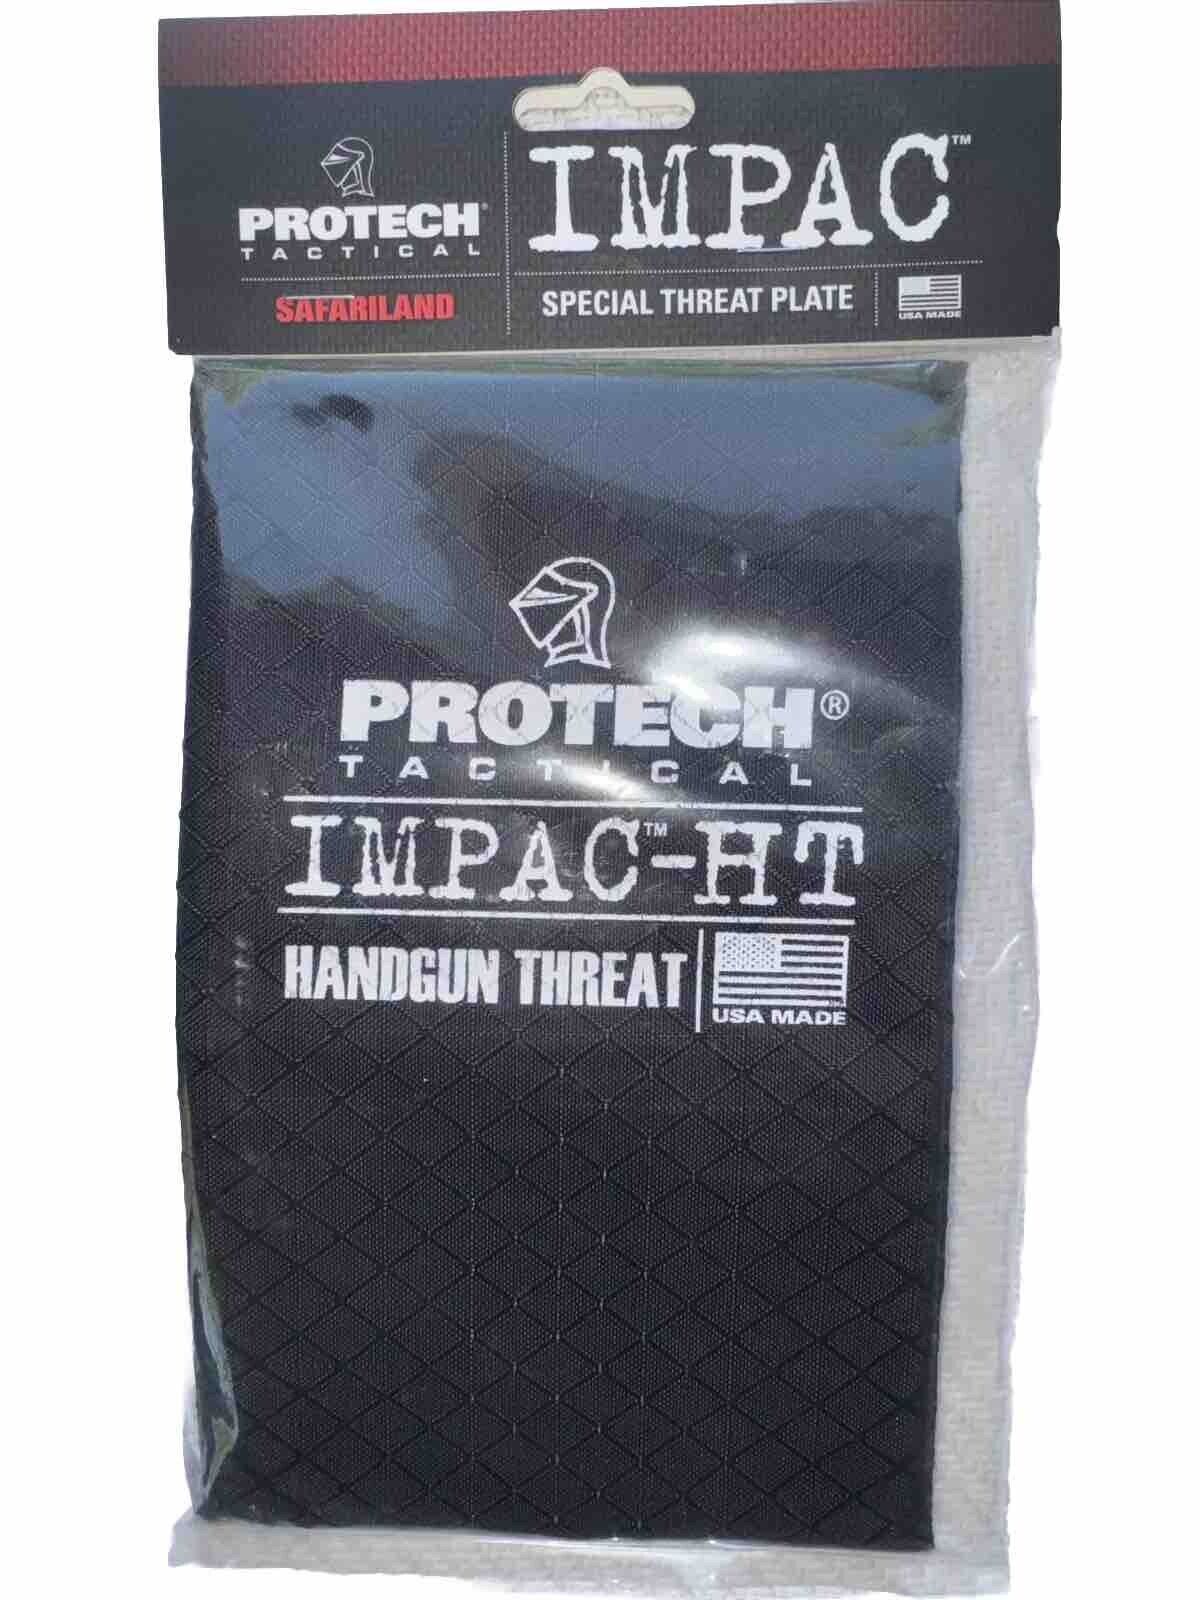 New Safariland Protech Tactical Special Threat Armor Plate Impac-HT 5x8